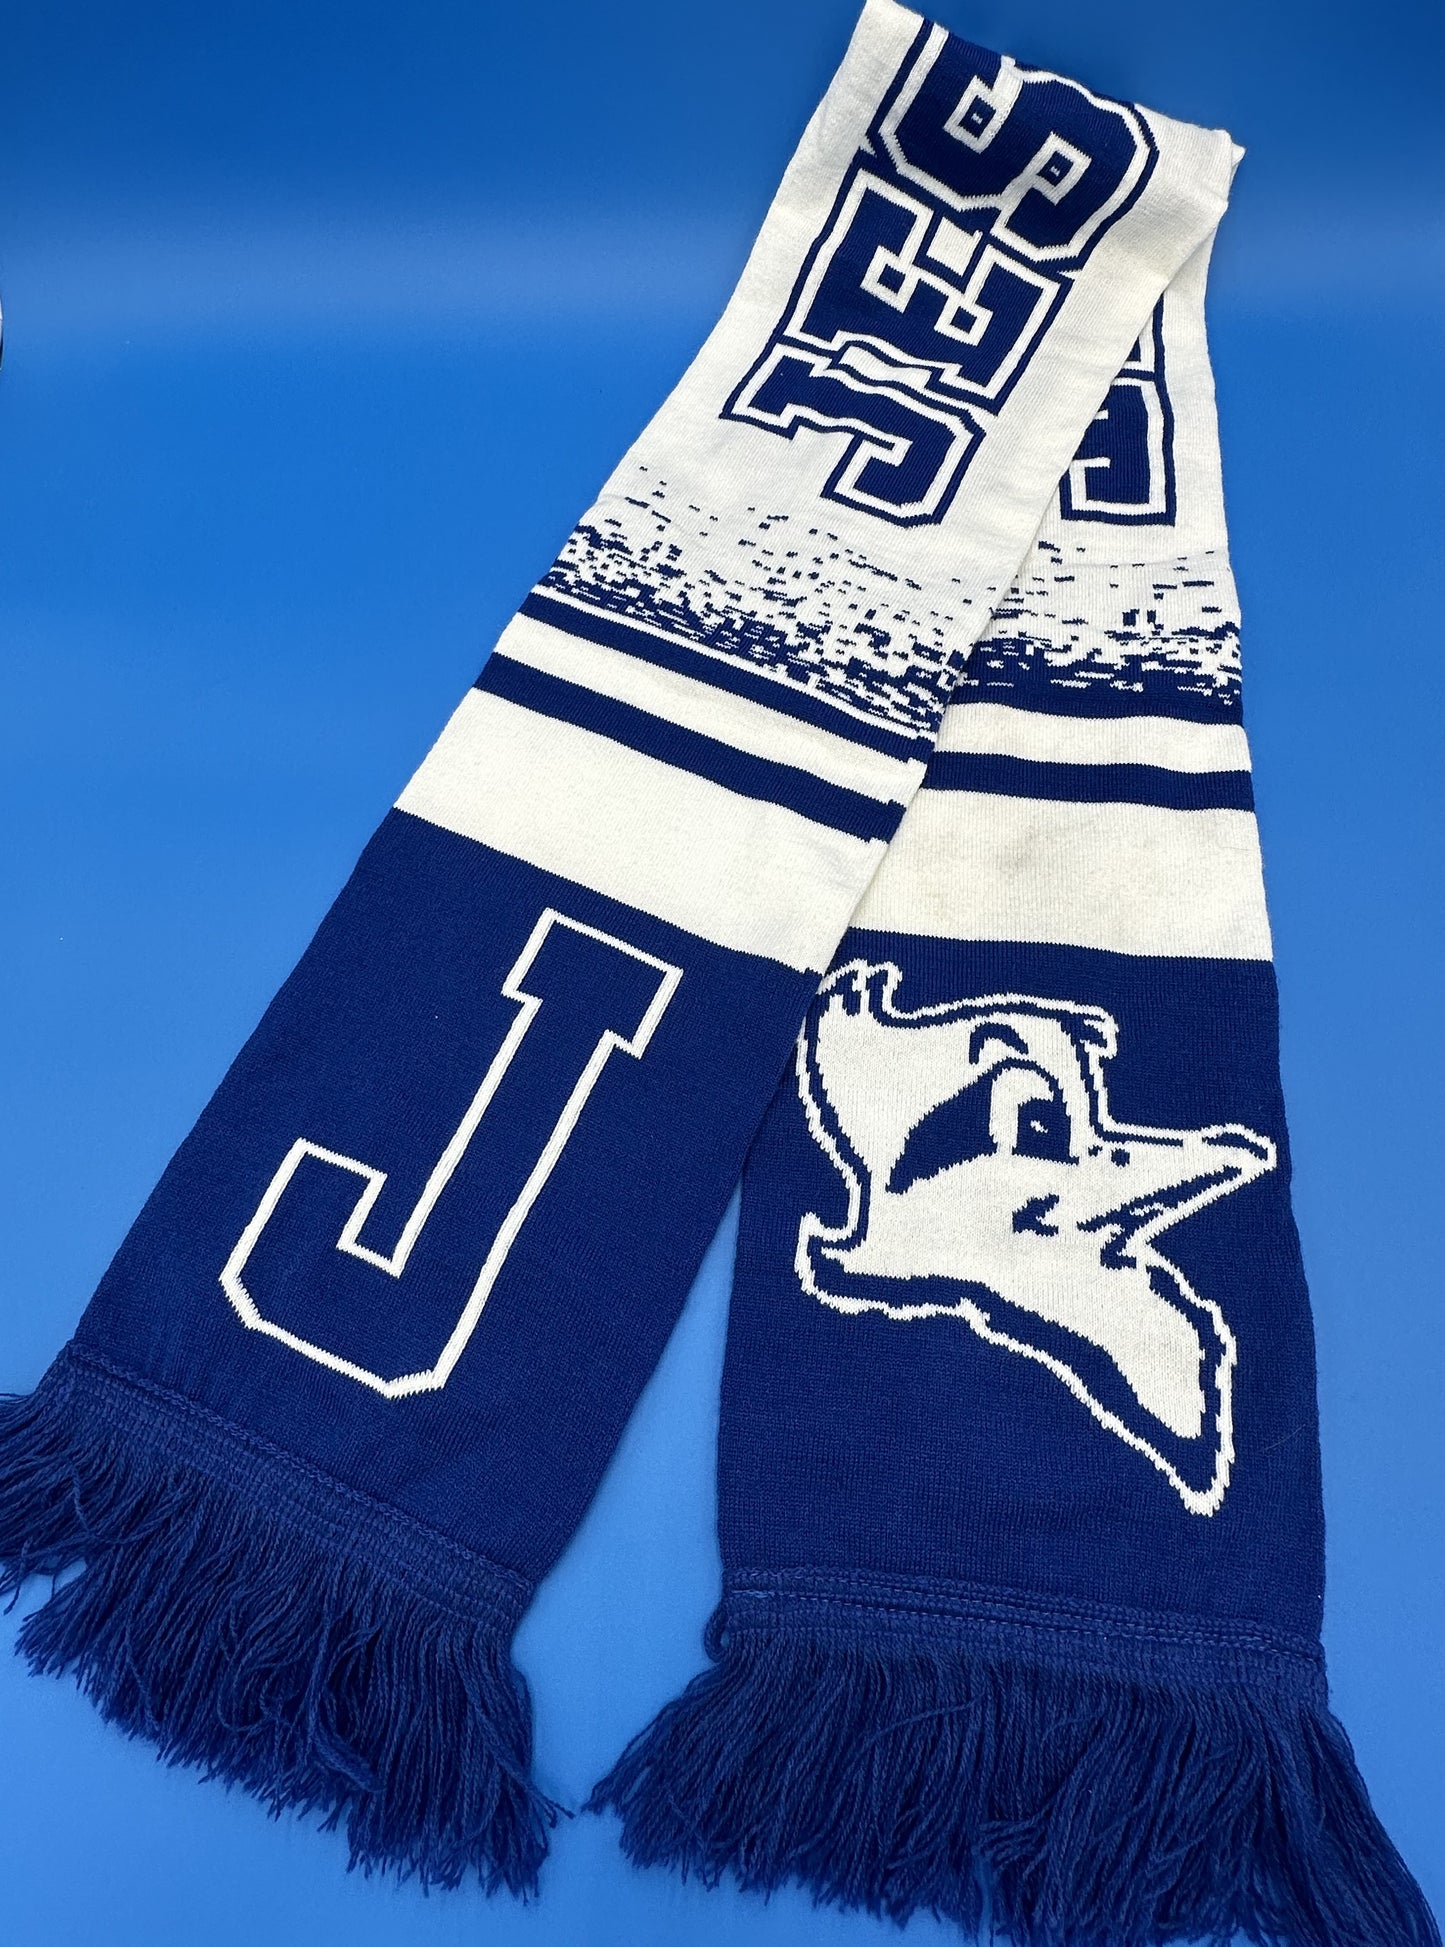 Logo Products.  100% Acrylic.  Royal Blue & White.  Measures 59" length by 8" width w/fringe.  Both sides feature Jesuit w/Jayson logo. Ideal for all Blue Jay fans wherever you're cheering!